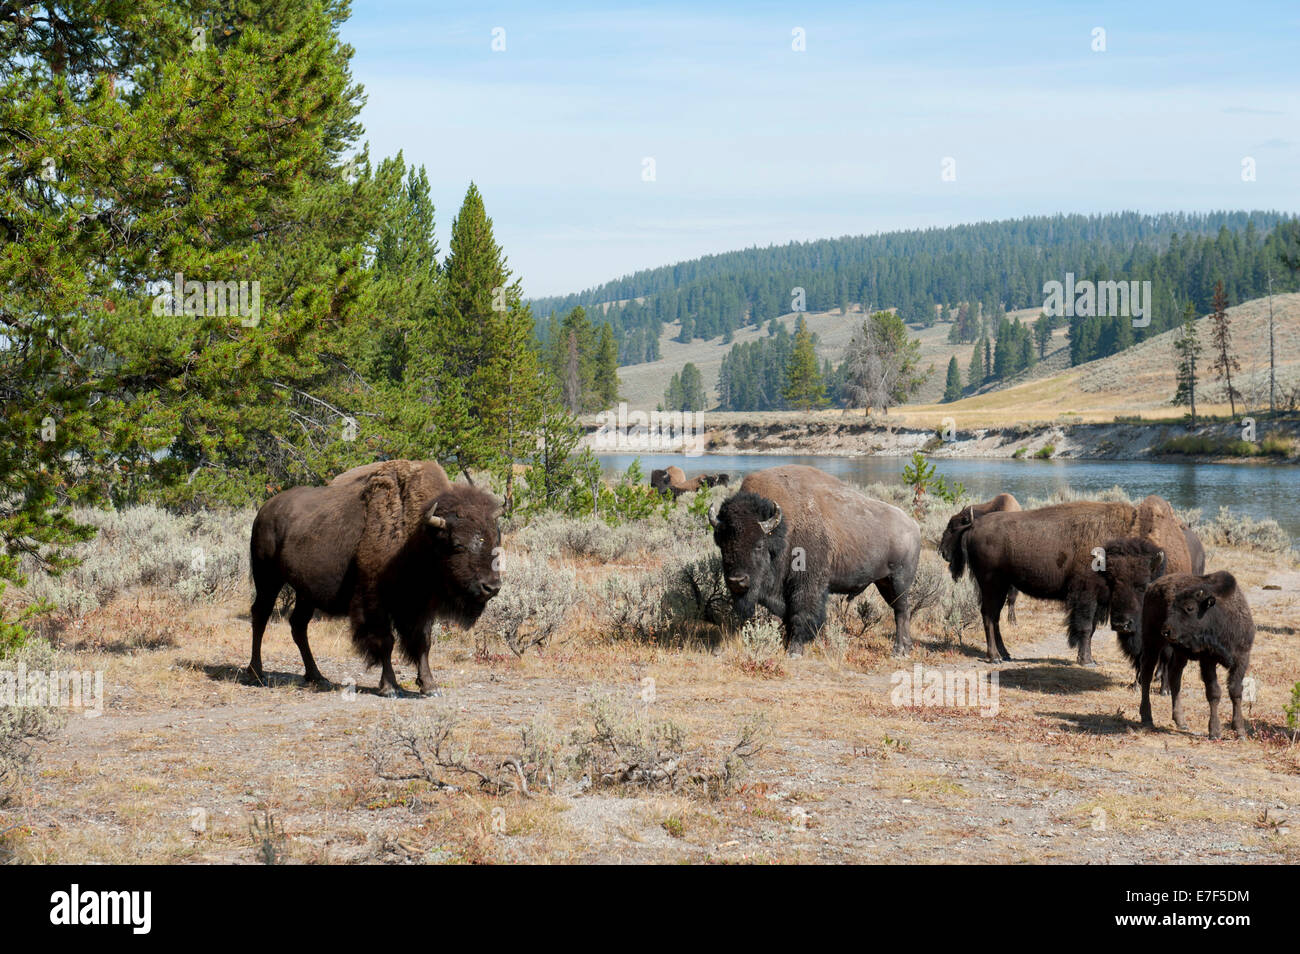 Herd of American Bison (Bison bison) beside Yellowstone River, Yellowstone National Park, Wyoming, USA Stock Photo